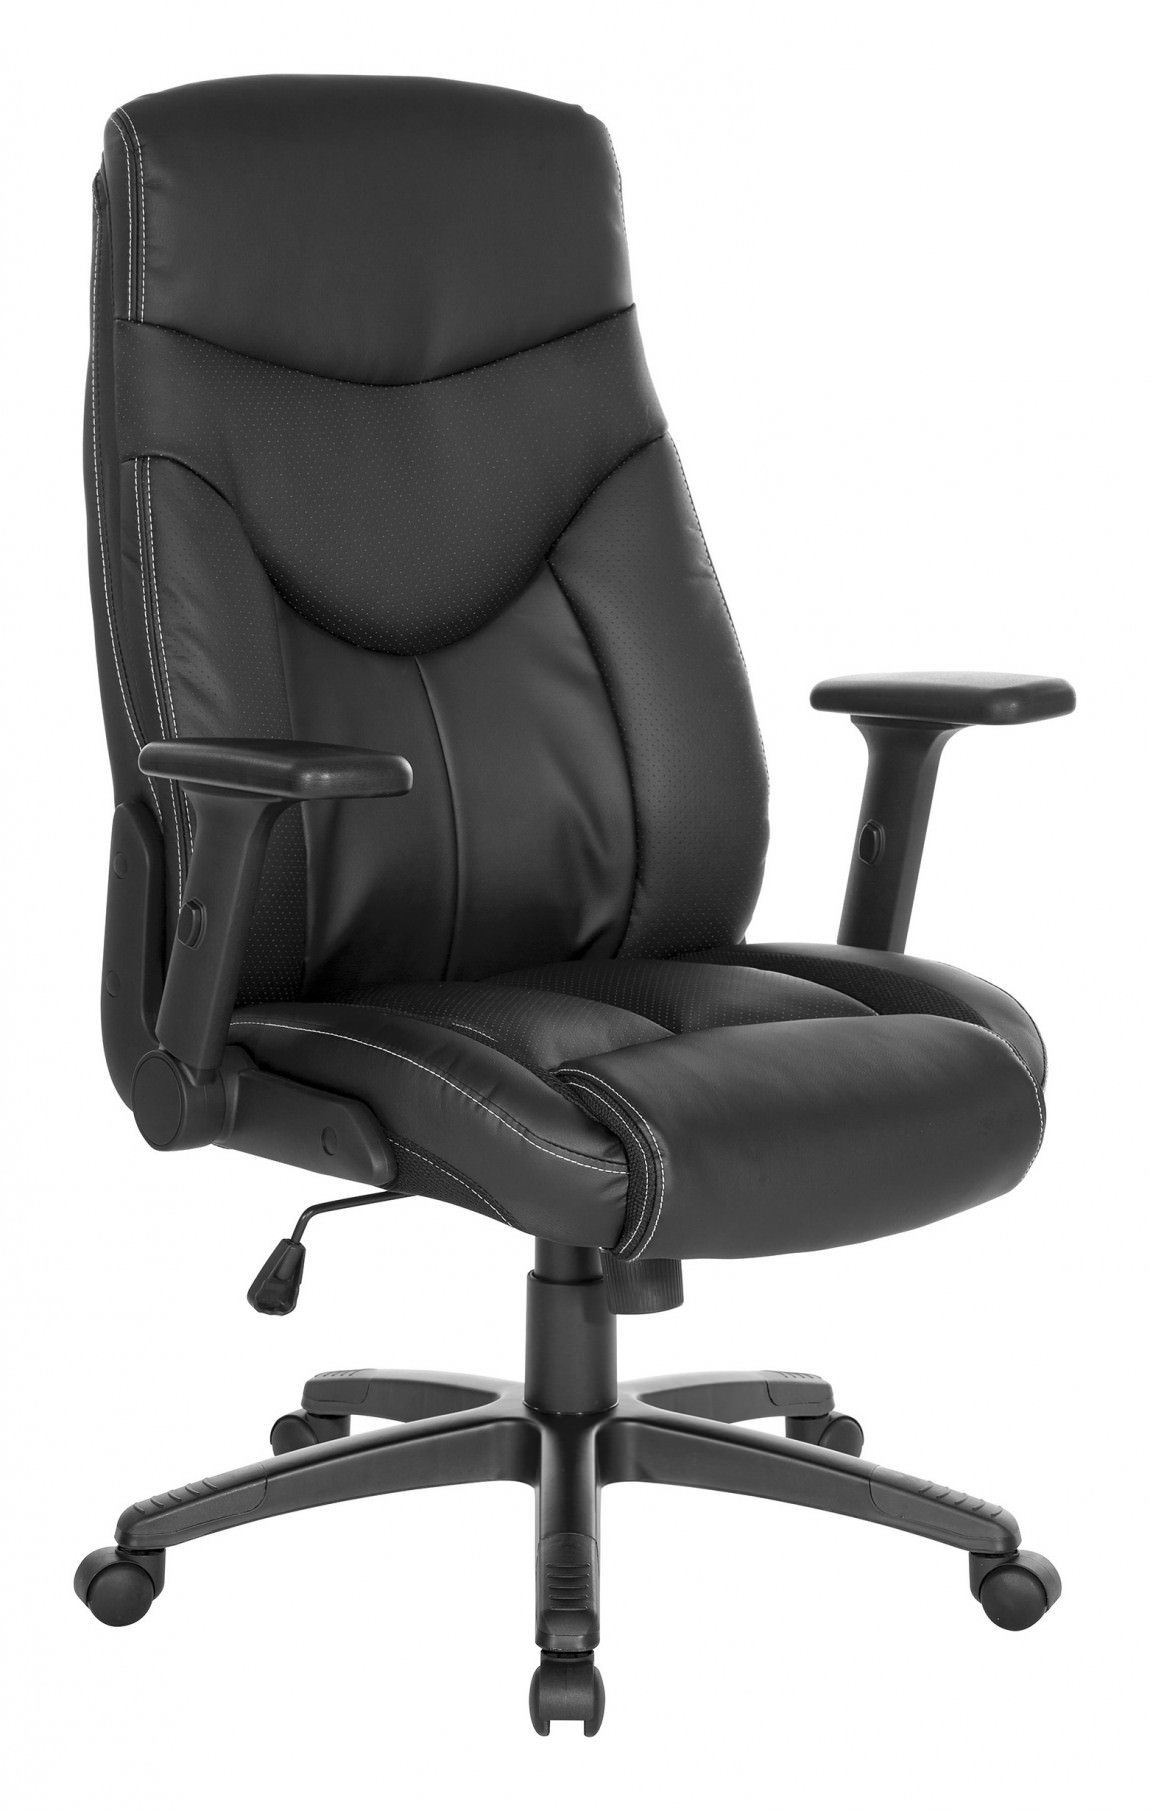 Executive High Back Leather Chair